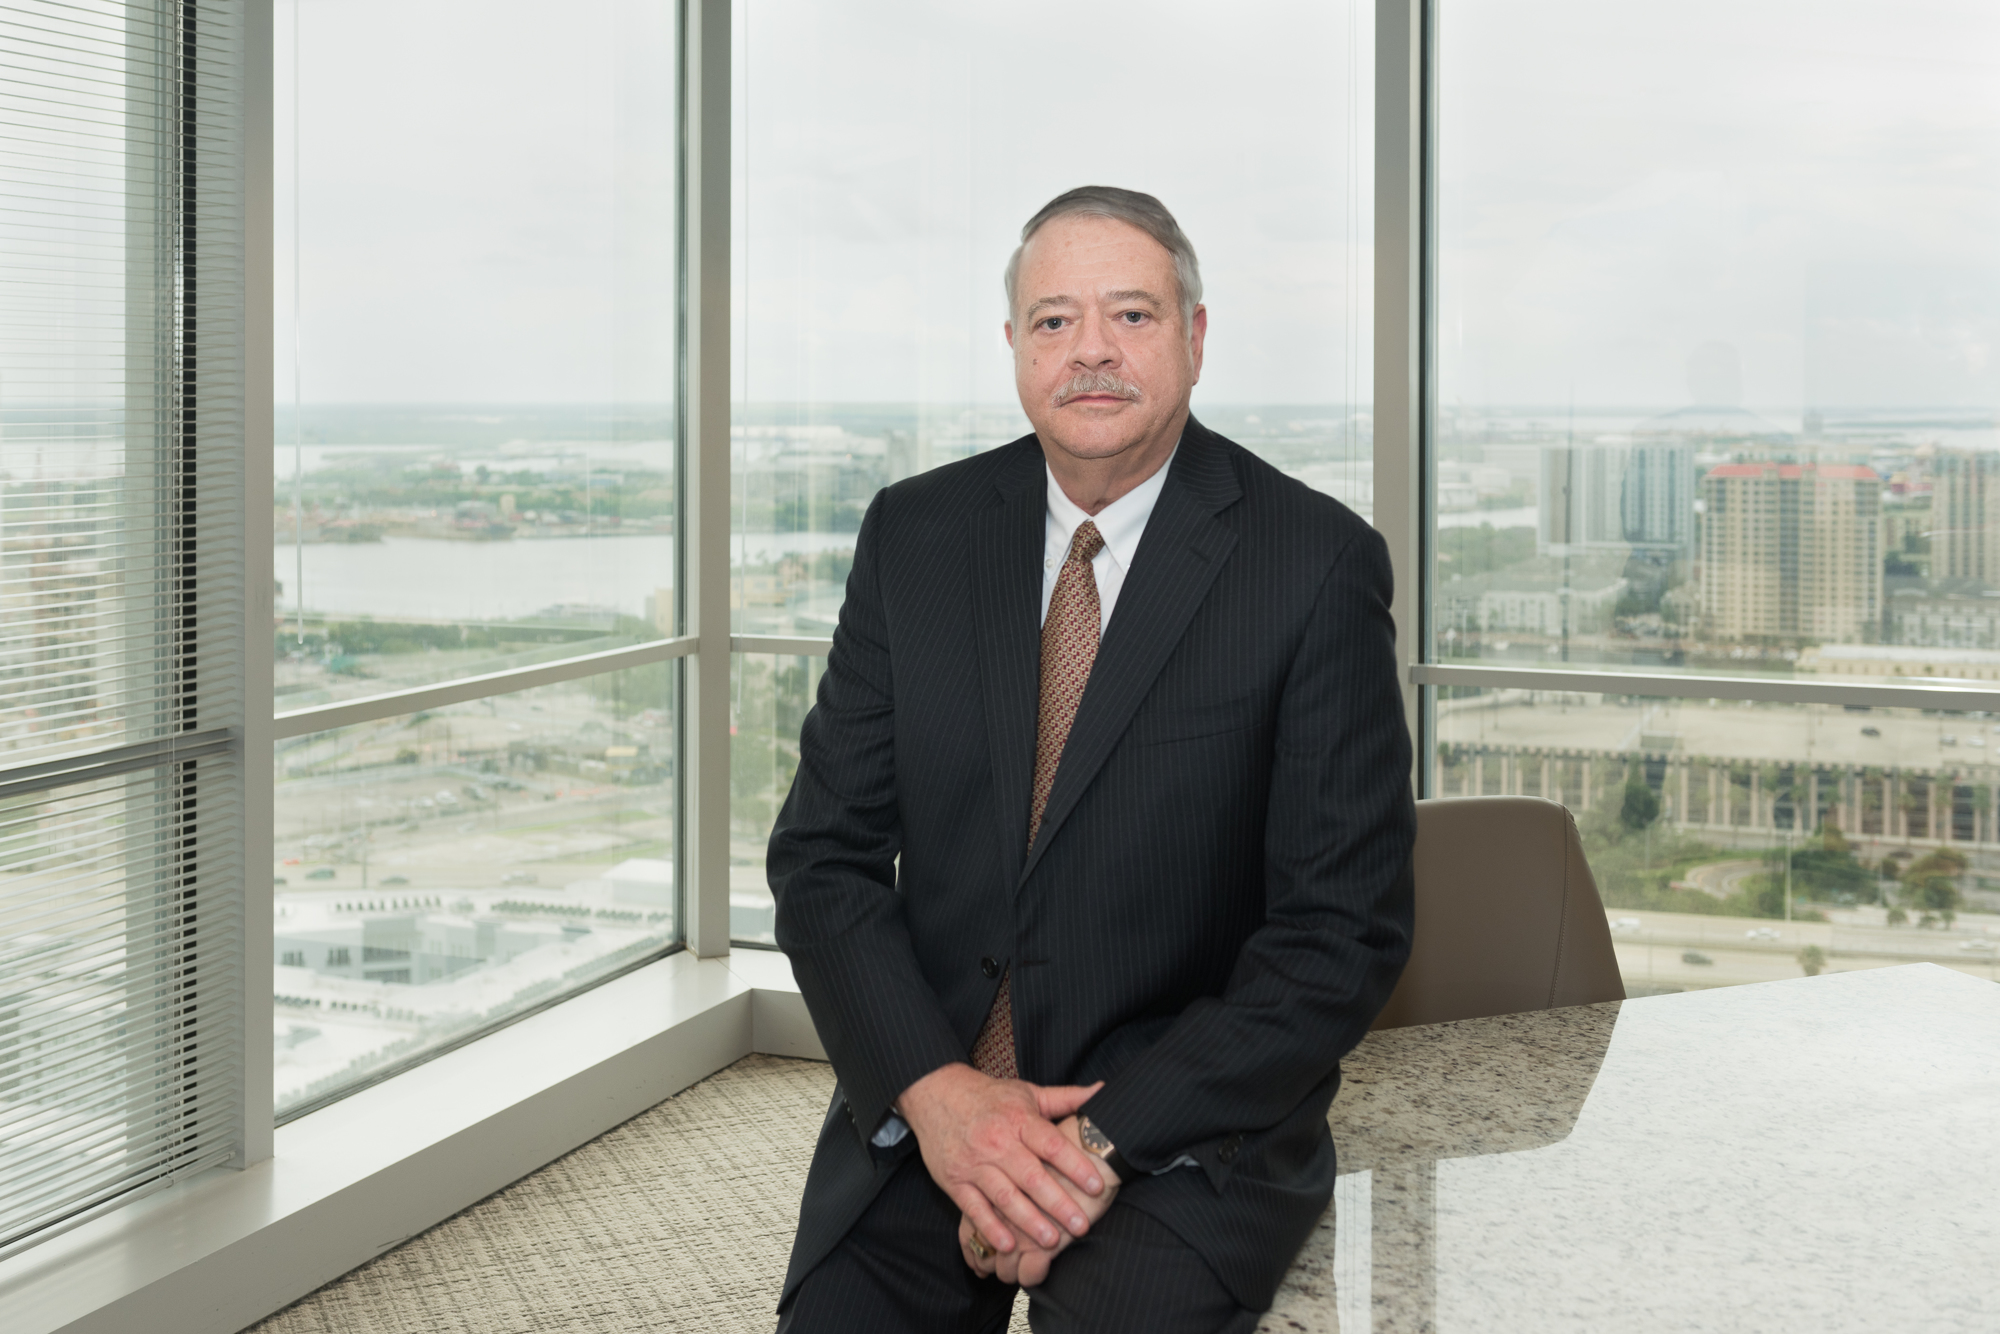 Bruce Lamb has been a mainstay in Gunster's health care practice since joining the law firm's Tampa office as a founding shareholder in 2011. Courtesy photo.